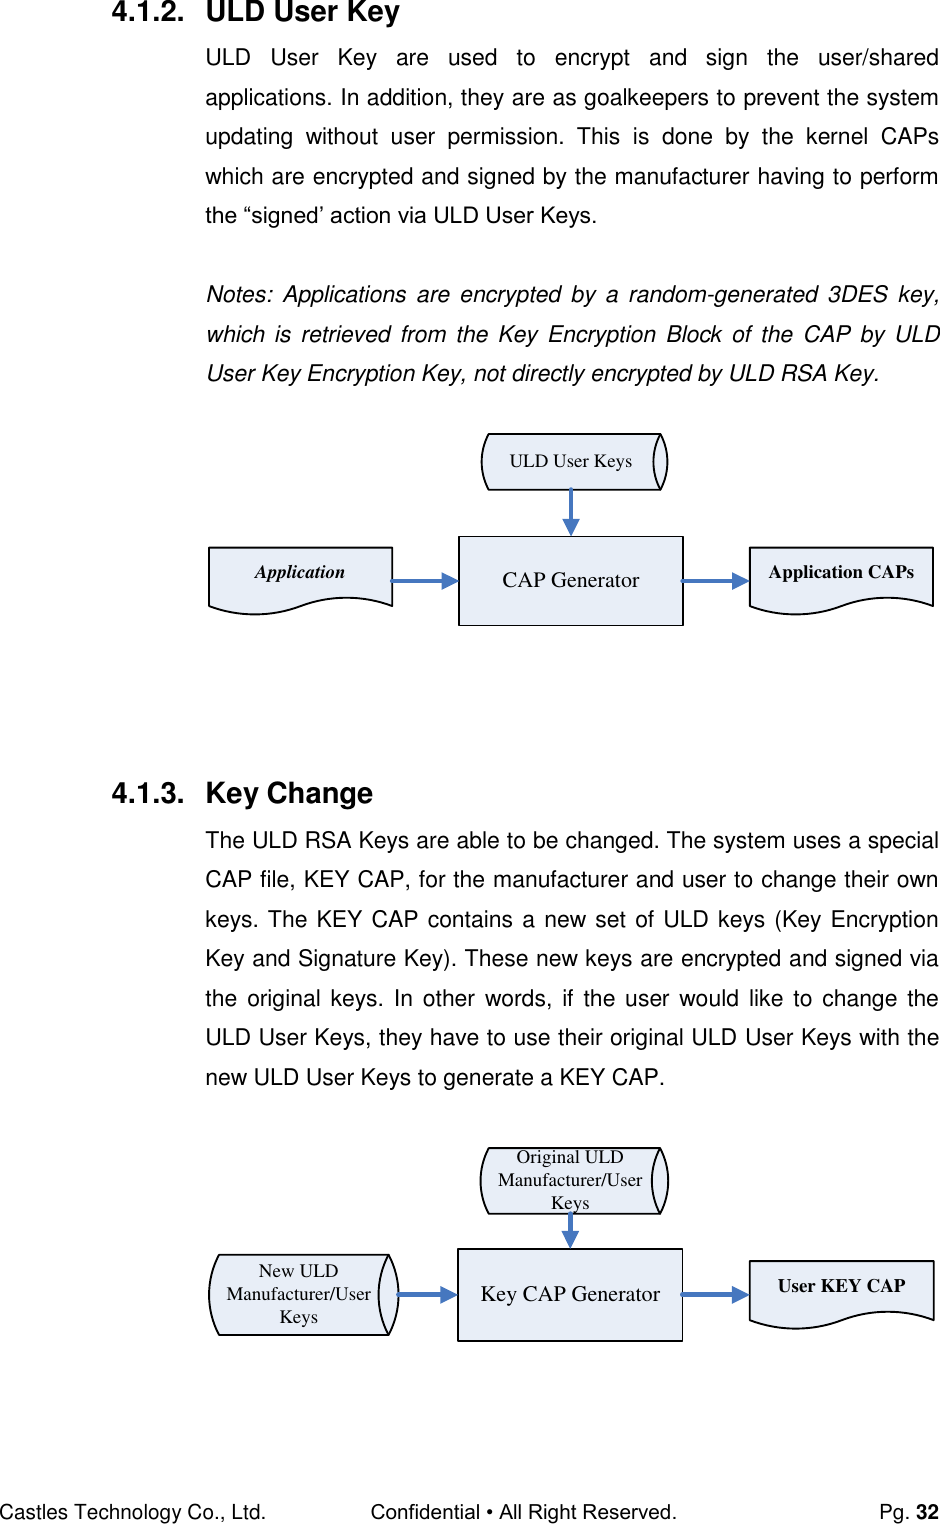 Castles Technology Co., Ltd. Confidential • All Right Reserved.  Pg. 32 4.1.2.  ULD User Key ULD  User  Key  are  used  to  encrypt  and  sign  the  user/shared applications. In addition, they are as goalkeepers to prevent the system updating  without  user  permission.  This  is  done  by  the  kernel  CAPs which are encrypted and signed by the manufacturer having to perform the “signed’ action via ULD User Keys.  Notes:  Applications  are encrypted  by  a  random-generated  3DES  key, which is retrieved from the Key Encryption Block of the  CAP by ULD User Key Encryption Key, not directly encrypted by ULD RSA Key.  Application Application CAPsULD User KeysCAP Generator     4.1.3.  Key Change The ULD RSA Keys are able to be changed. The system uses a special CAP file, KEY CAP, for the manufacturer and user to change their own keys. The KEY CAP contains a new set of ULD keys (Key Encryption Key and Signature Key). These new keys are encrypted and signed via the  original keys. In  other  words, if the user would like  to  change the ULD User Keys, they have to use their original ULD User Keys with the new ULD User Keys to generate a KEY CAP.  Key CAP GeneratorOriginal ULD Manufacturer/User KeysNew ULD Manufacturer/User KeysUser KEY CAP    